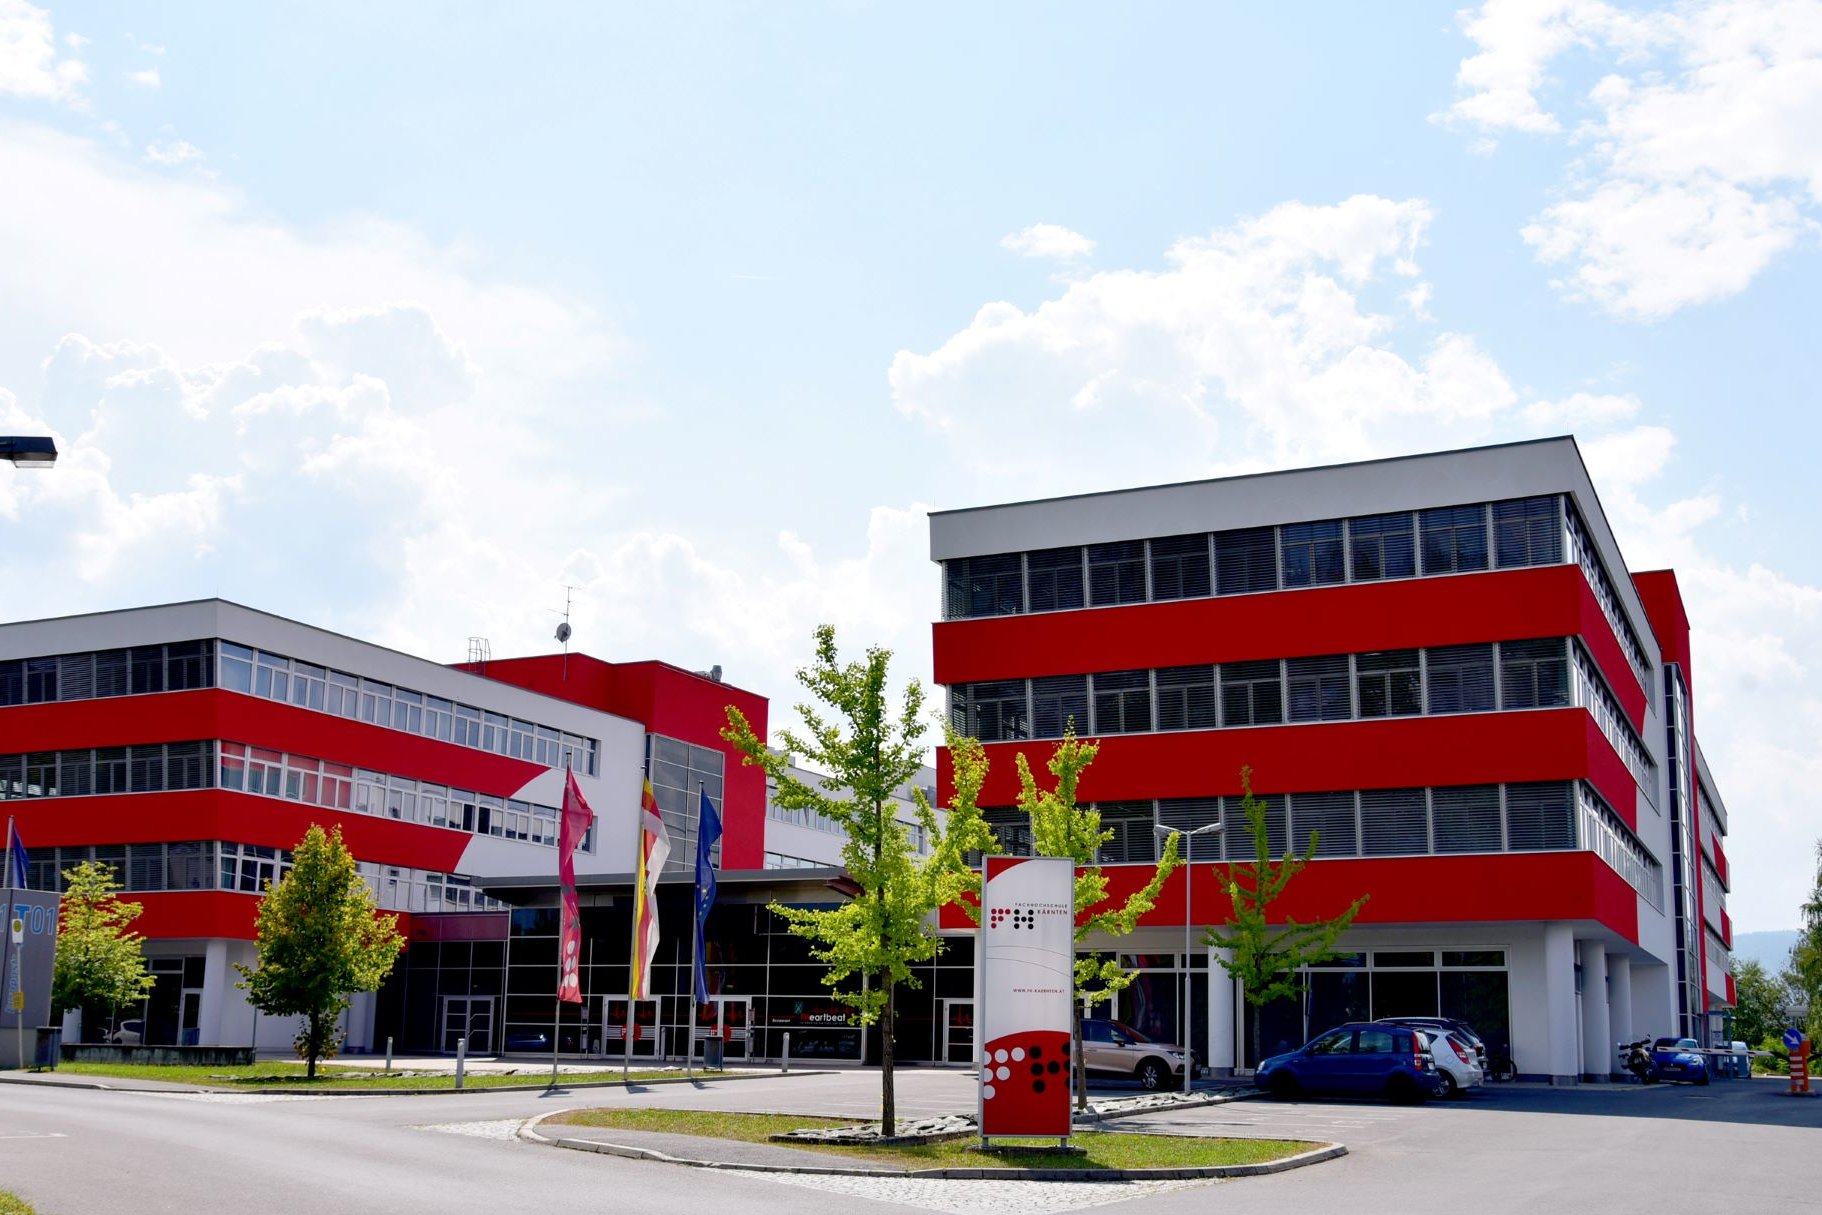 The Villach location of the University of Applied Science (FH) Kärnten